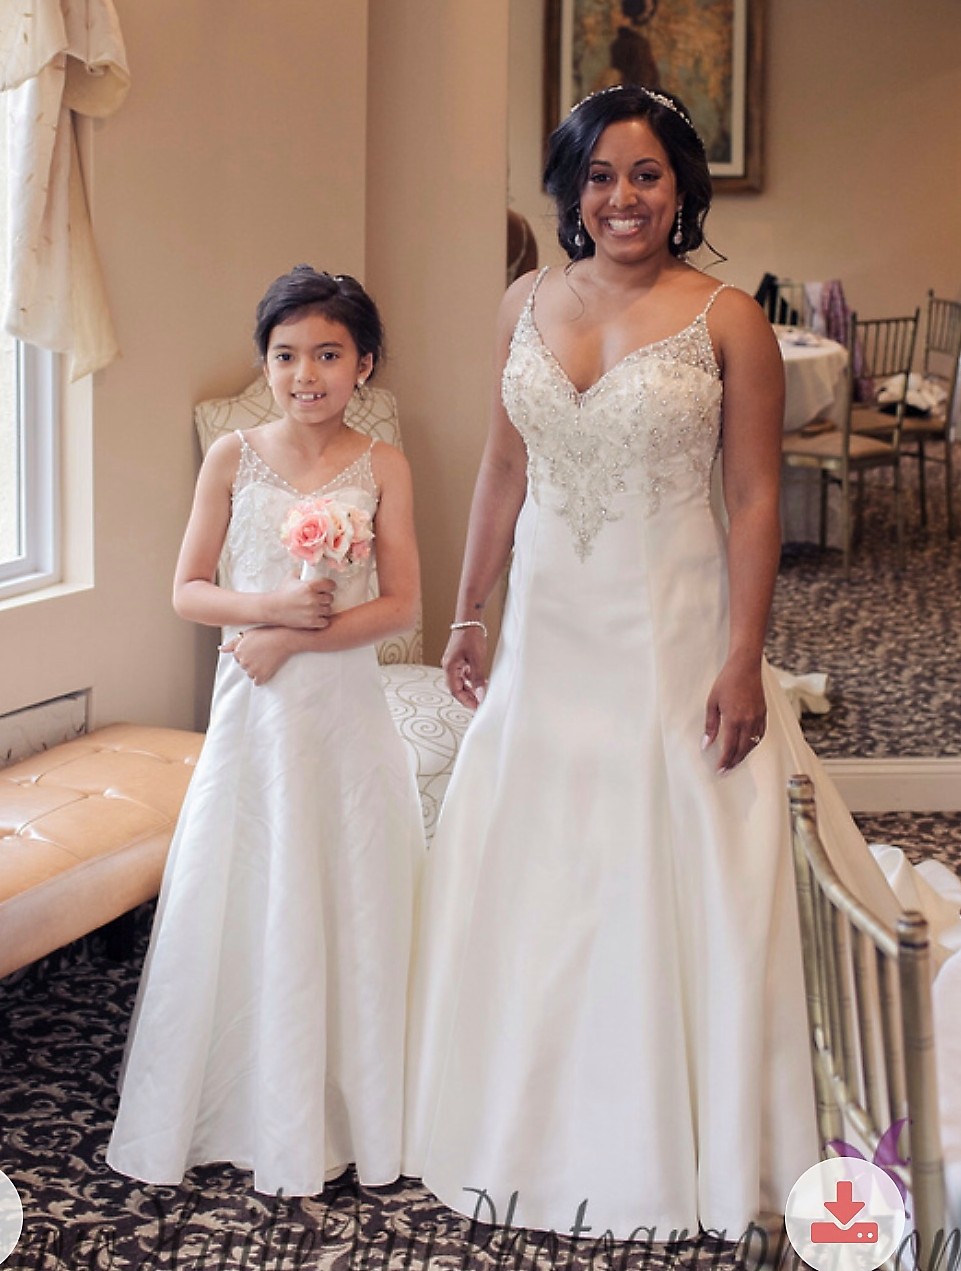 I would love for my daughter to have a matching flower girl dress. I have the Kimberly dress by Maggie Sottero. 